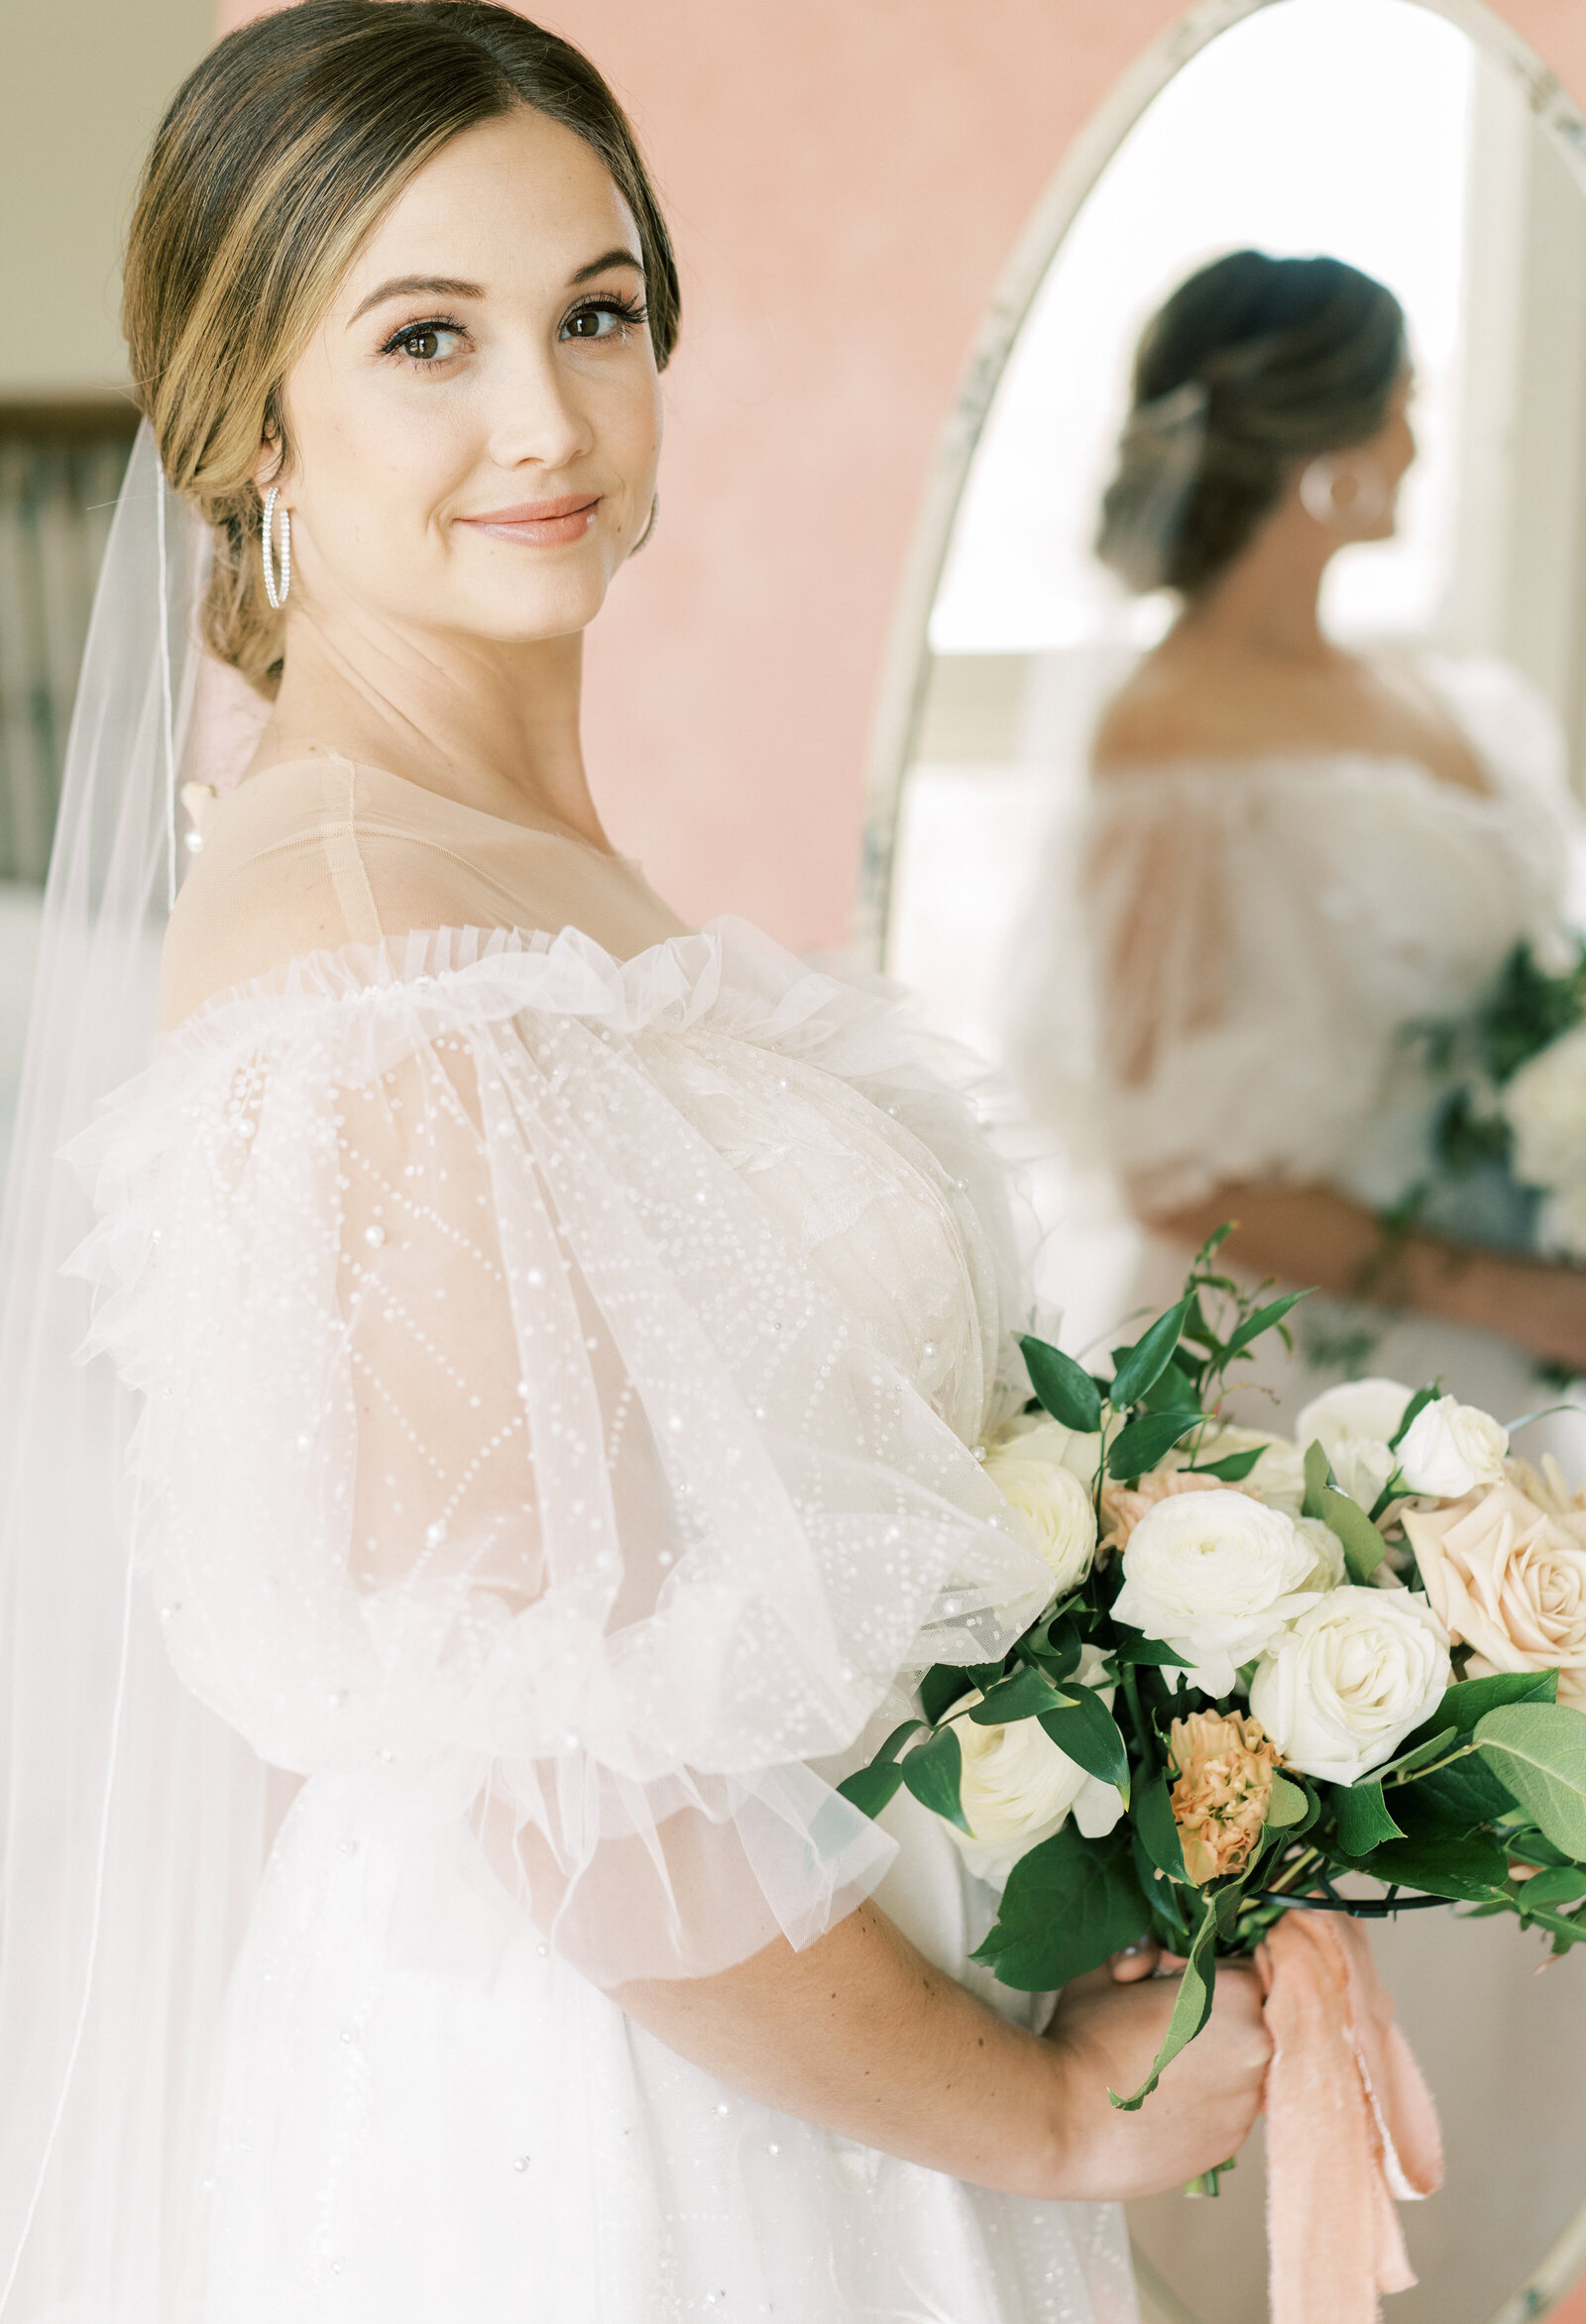 Portrait of a bride in a white wedding gown holding a bouquet of flowers in front of a round mirror.